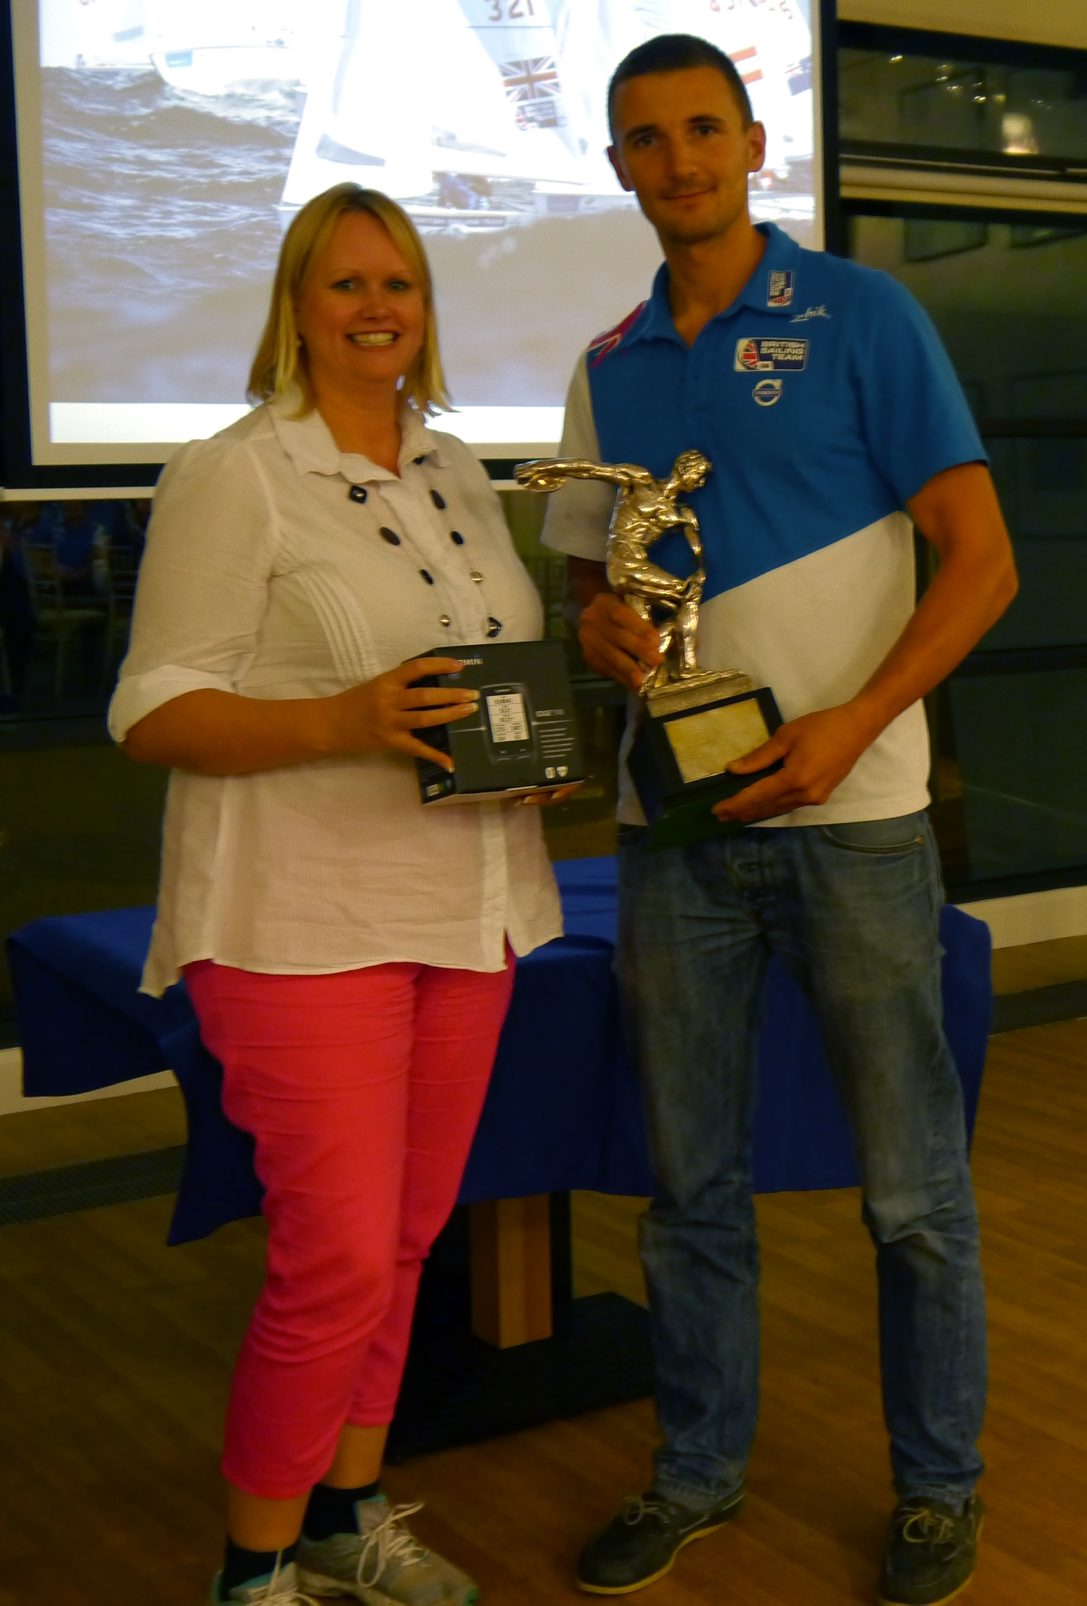 Giles Scott receiving his British Sailing Athlete of the Year award from Gail Cook marketing and communications manager at Garmin ©British Sailing Team